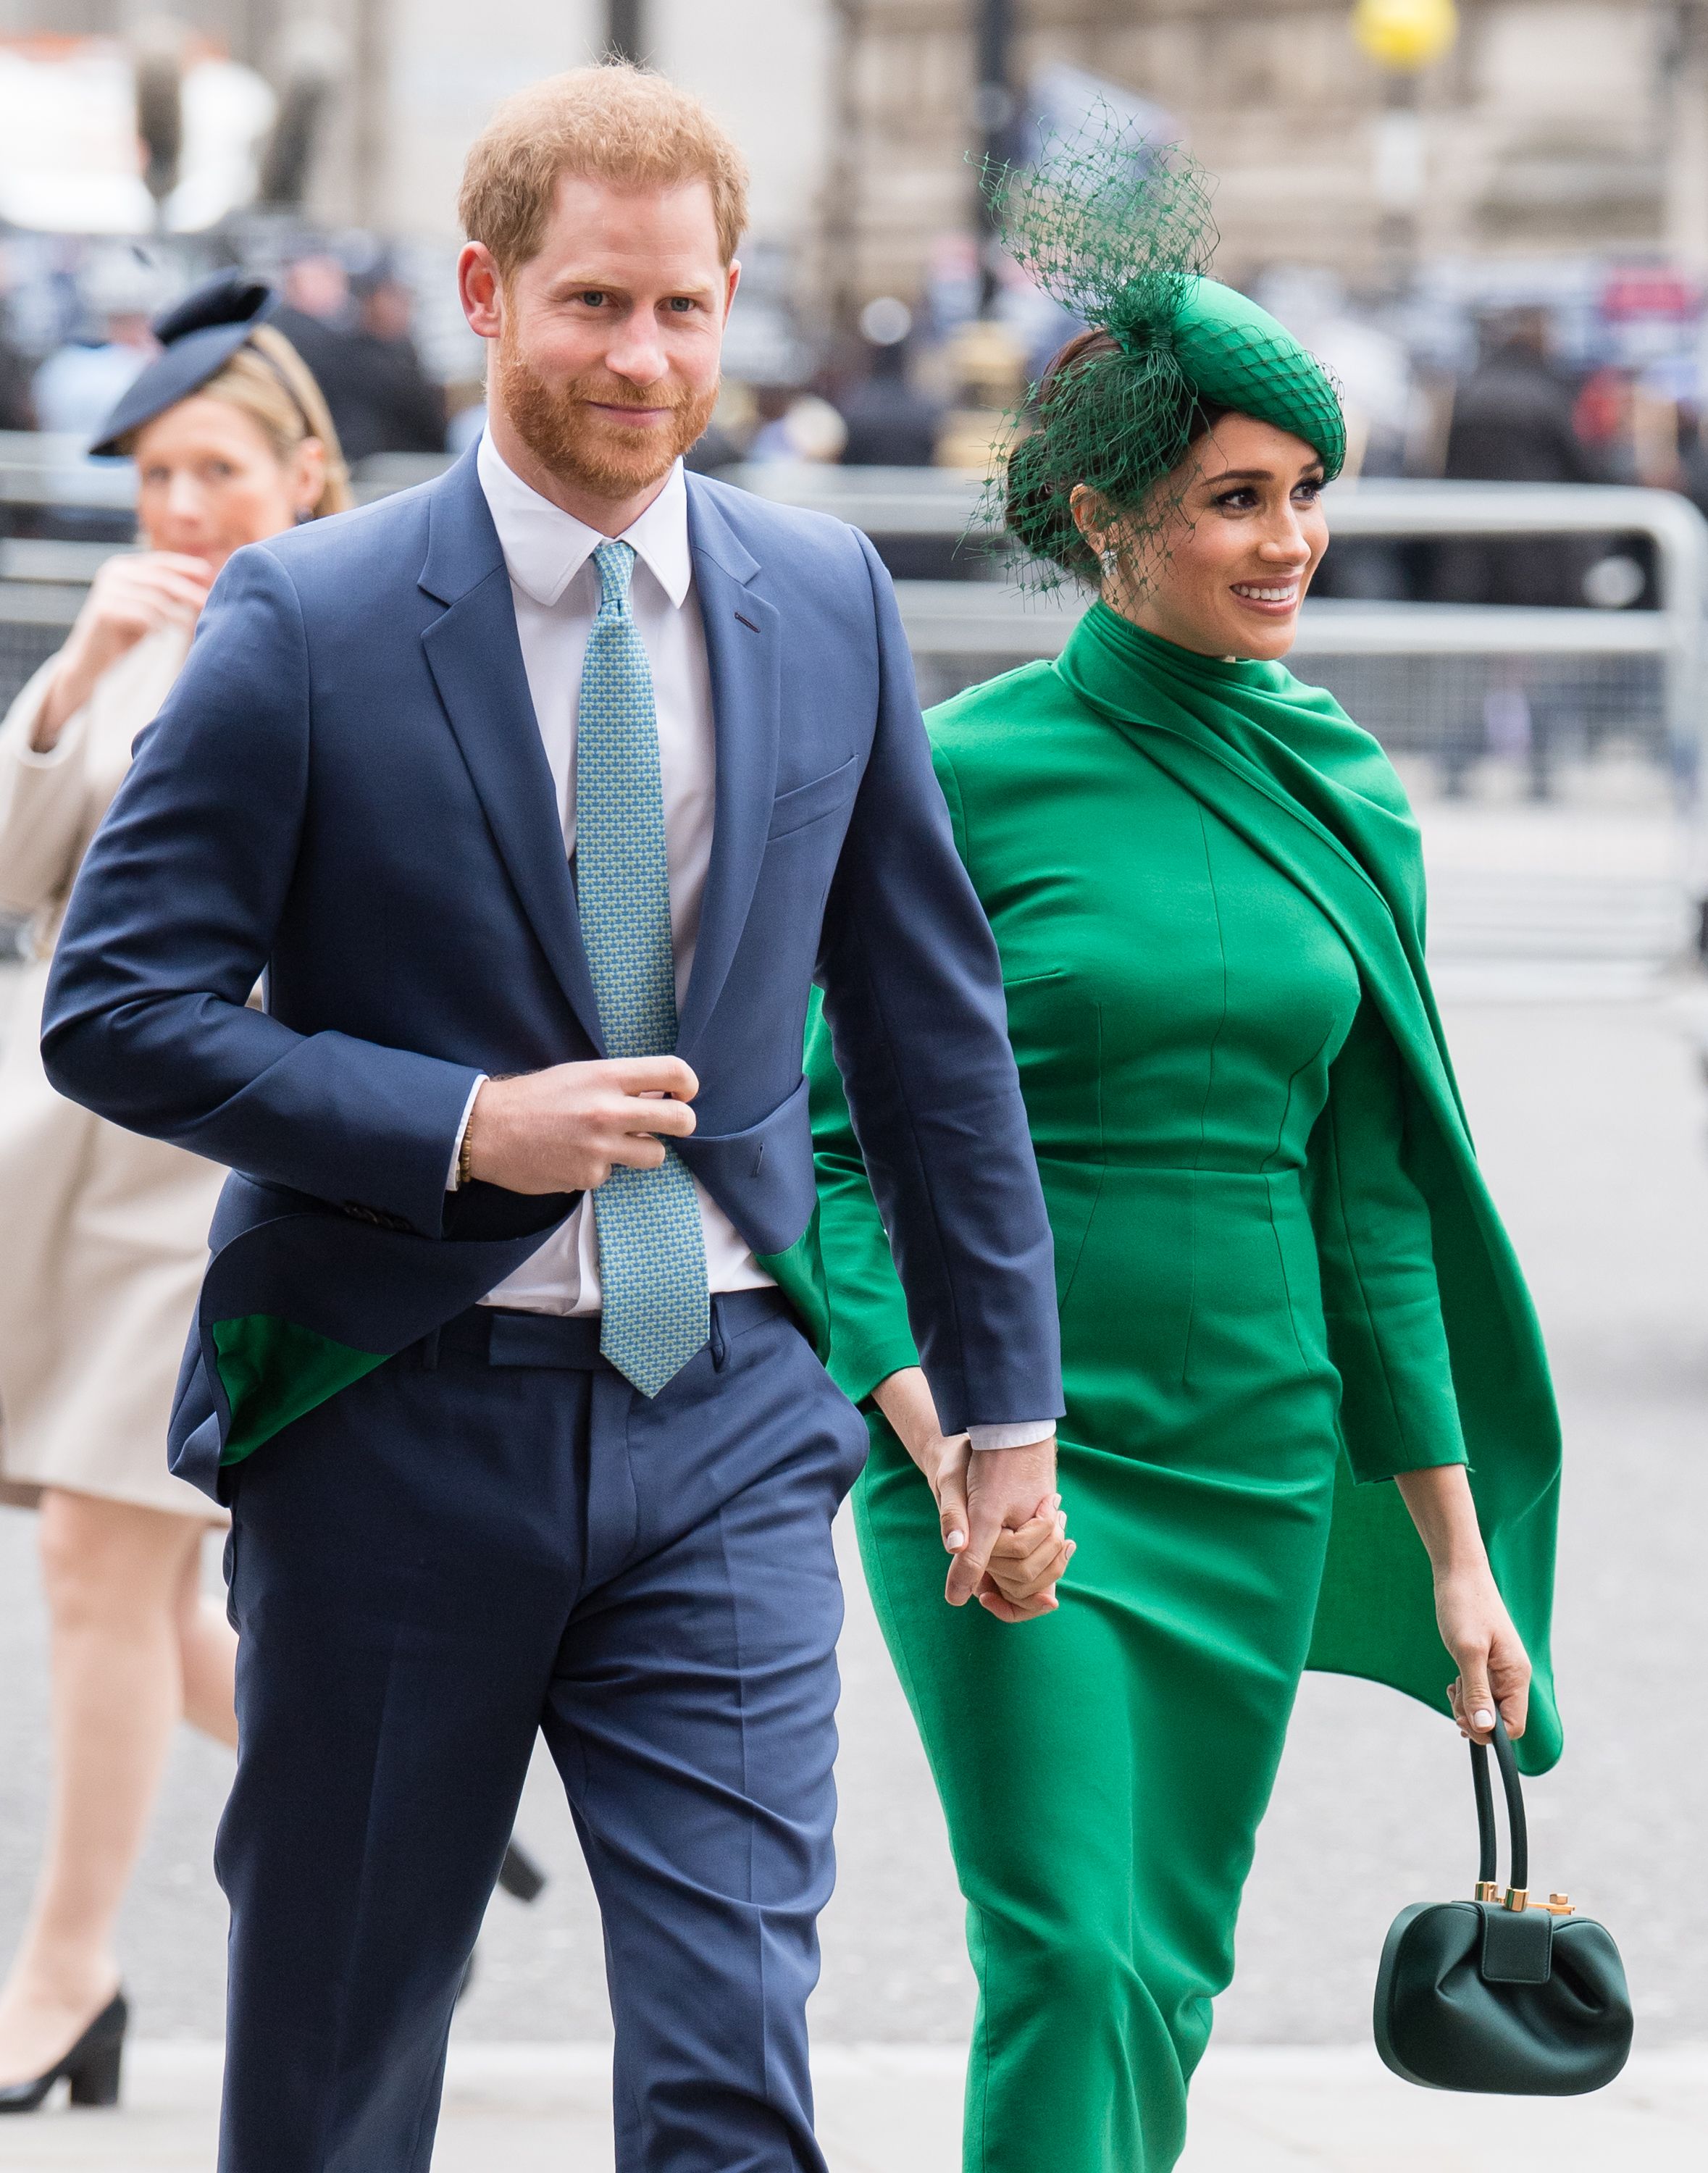 Prince Harry and Meghan Markle at the Commonwealth Day Service 2020 on March 09, 2020 | Photo: Getty Images